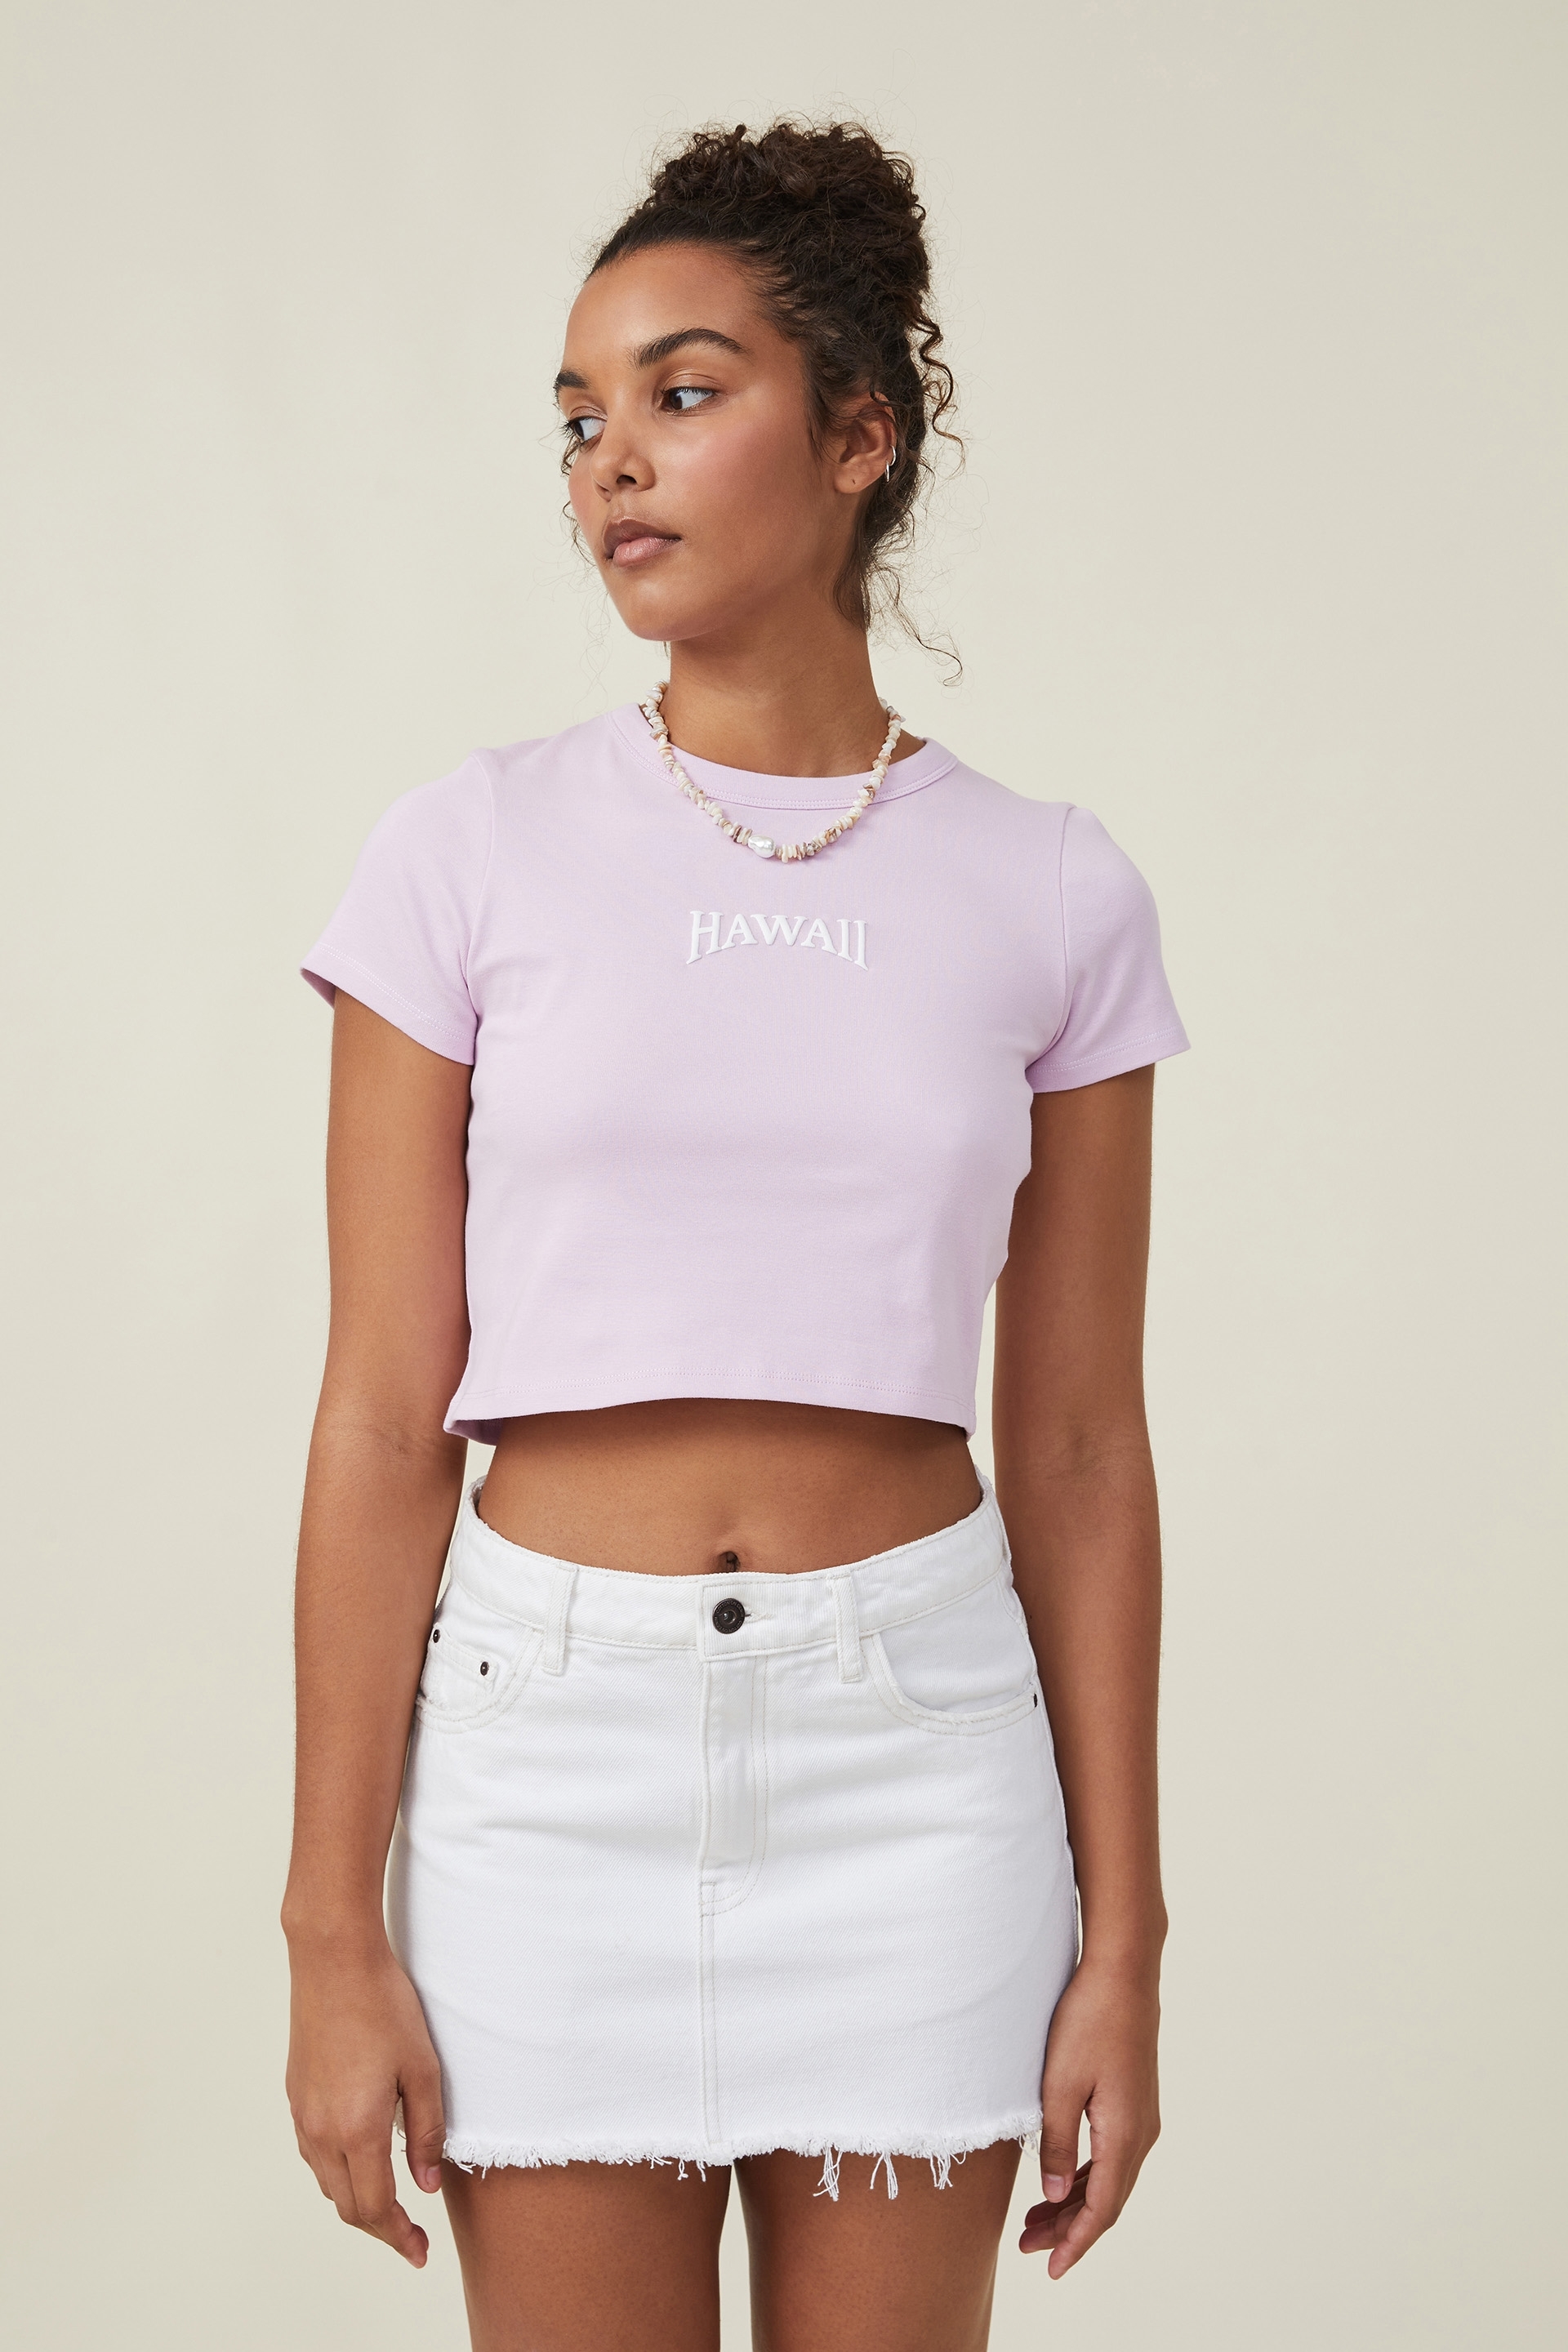 Cotton On Women - Micro Fit Rib Graphic Tee - Hawaii/cloudy pink